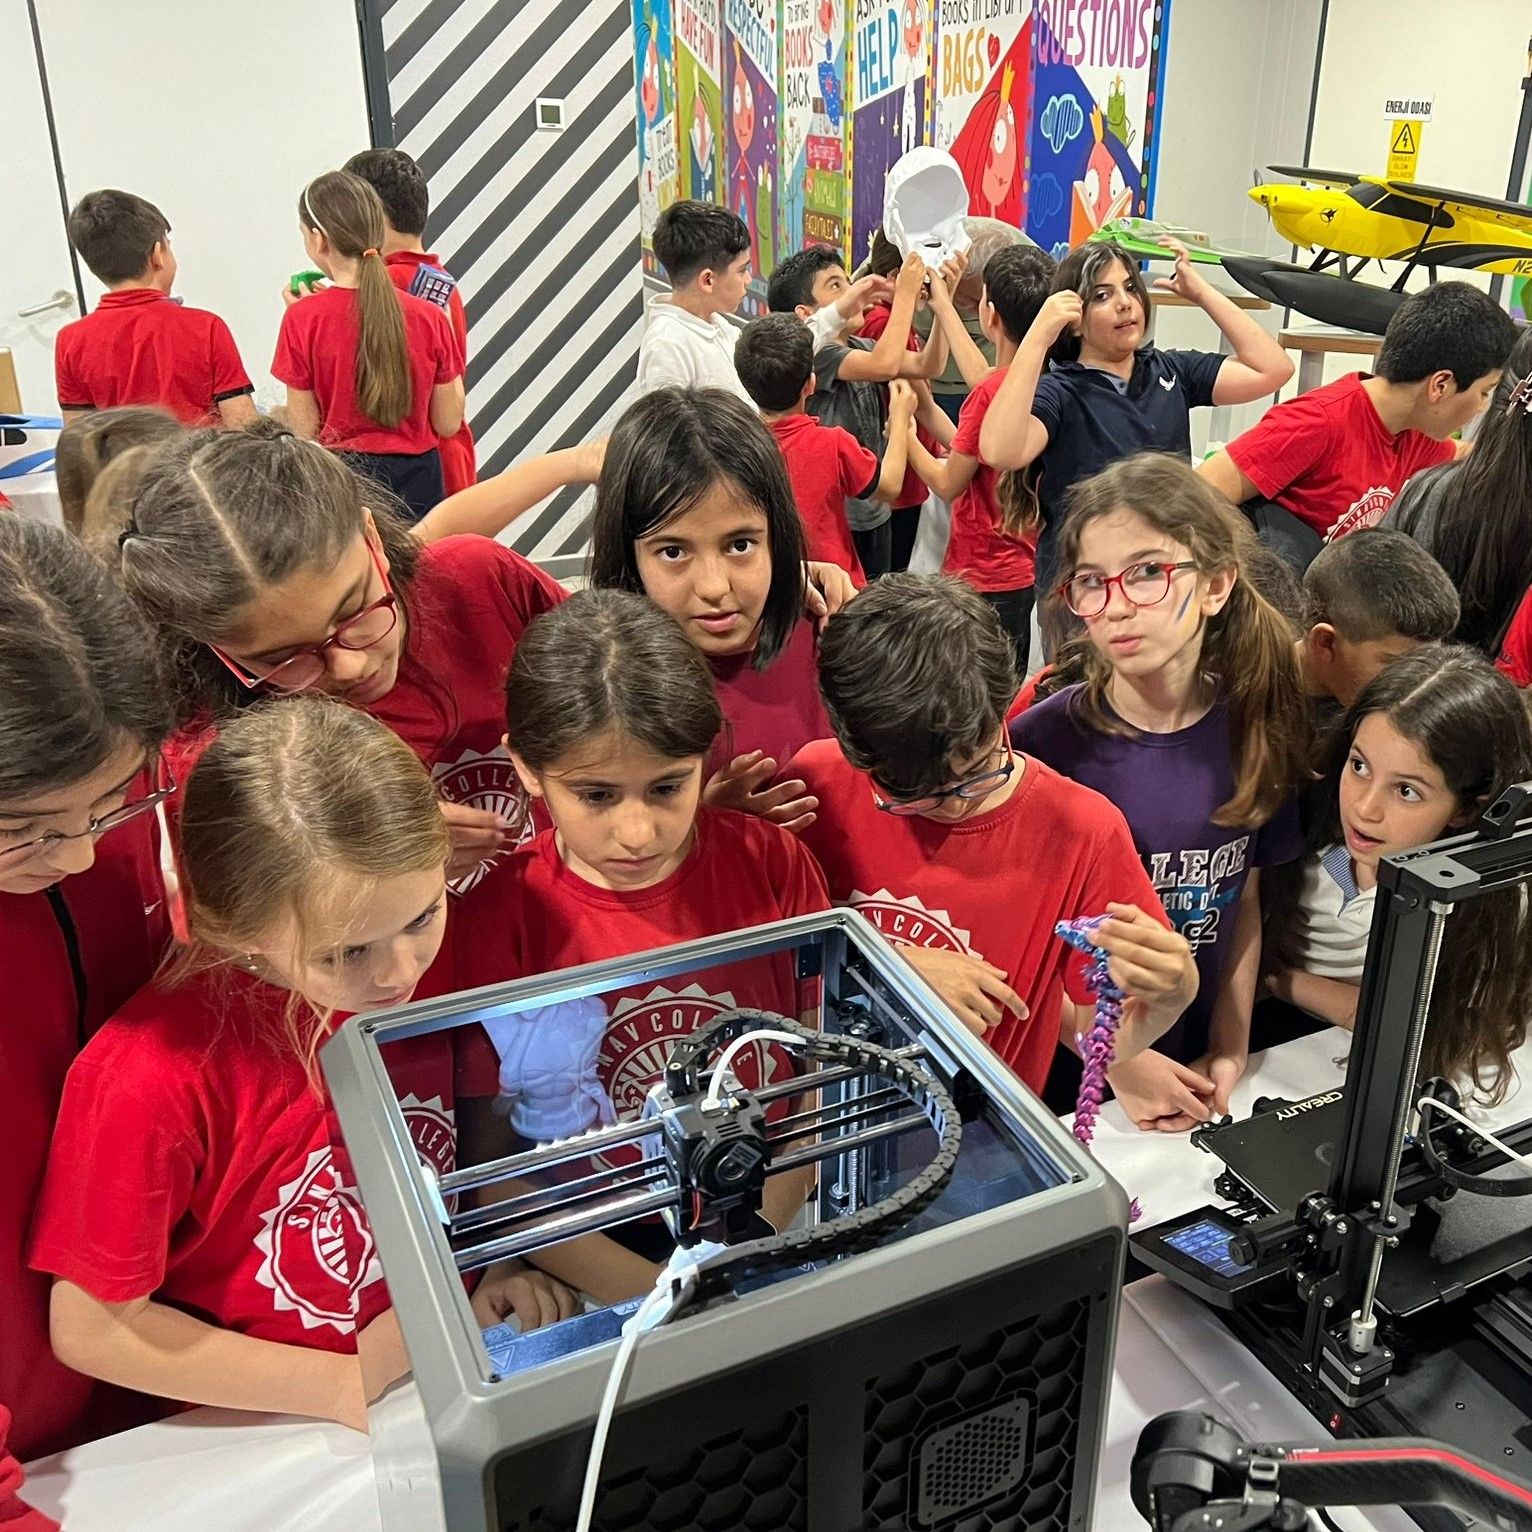 Children around 3D printer without protection